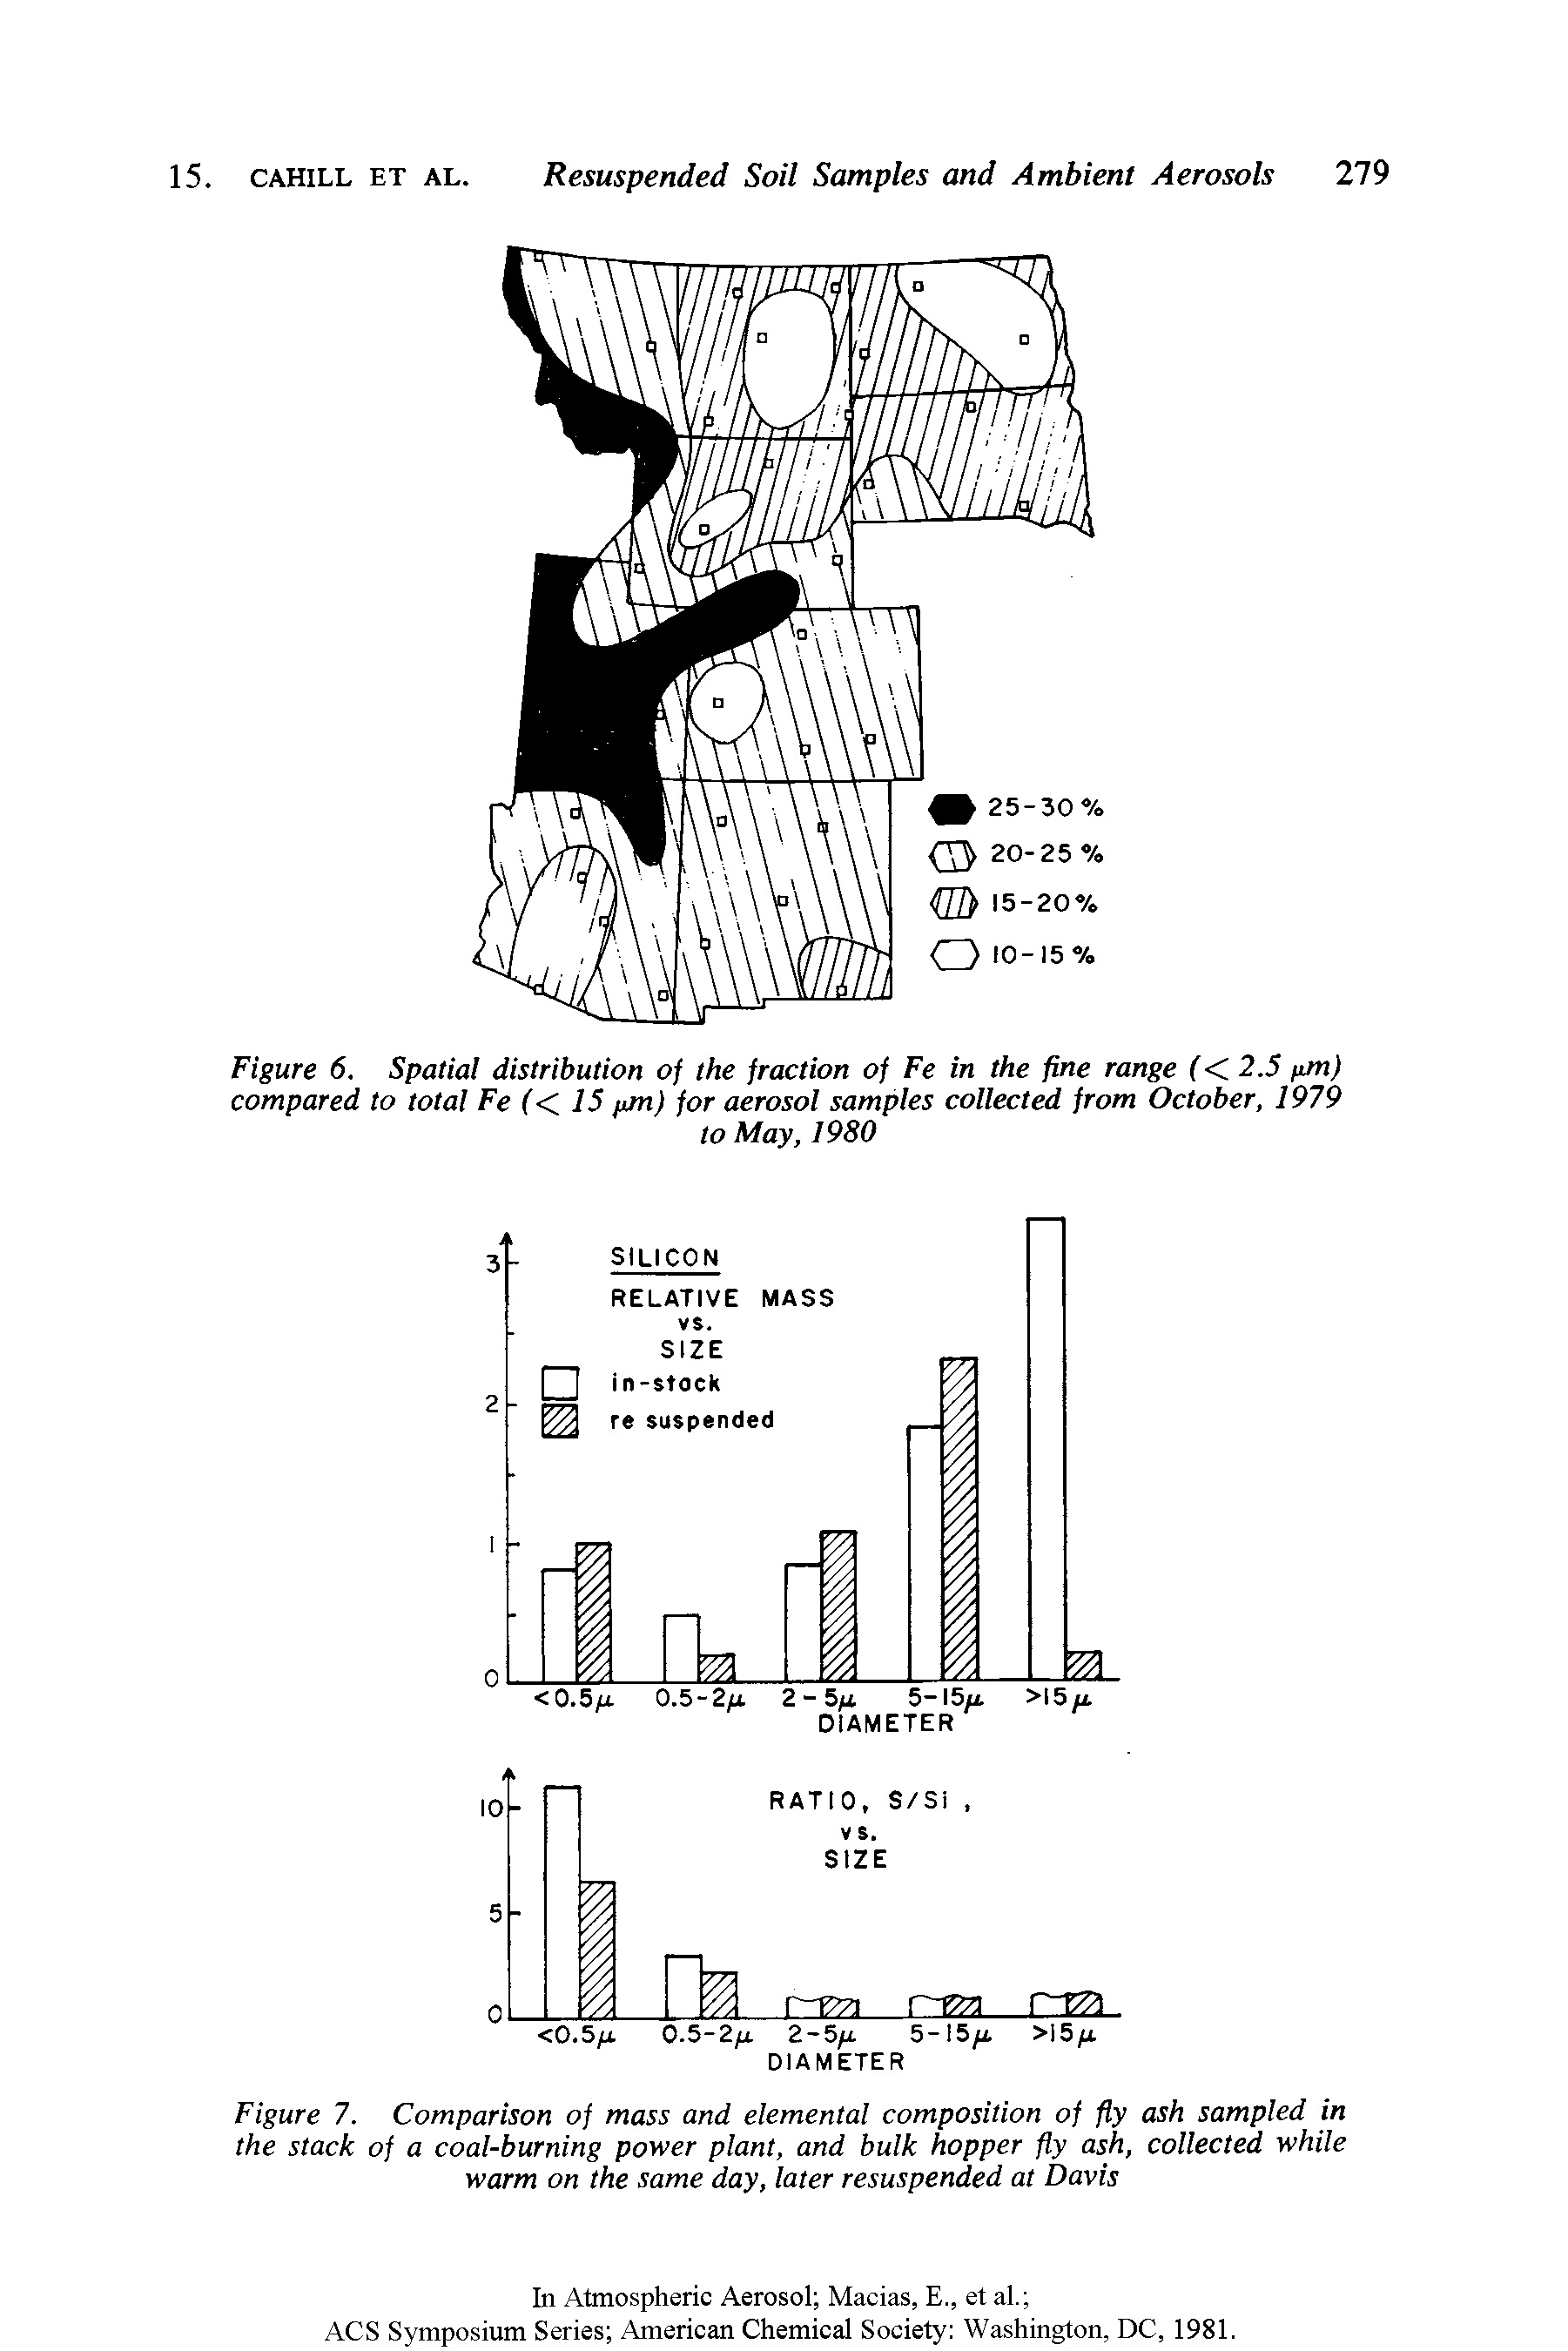 Figure 7. Comparison of mass and elemental composition of fly ash sampled in the stack of a coal-burning power plant, and bulk hopper fly ash, collected while warm on the same day, later resuspended at Davis...